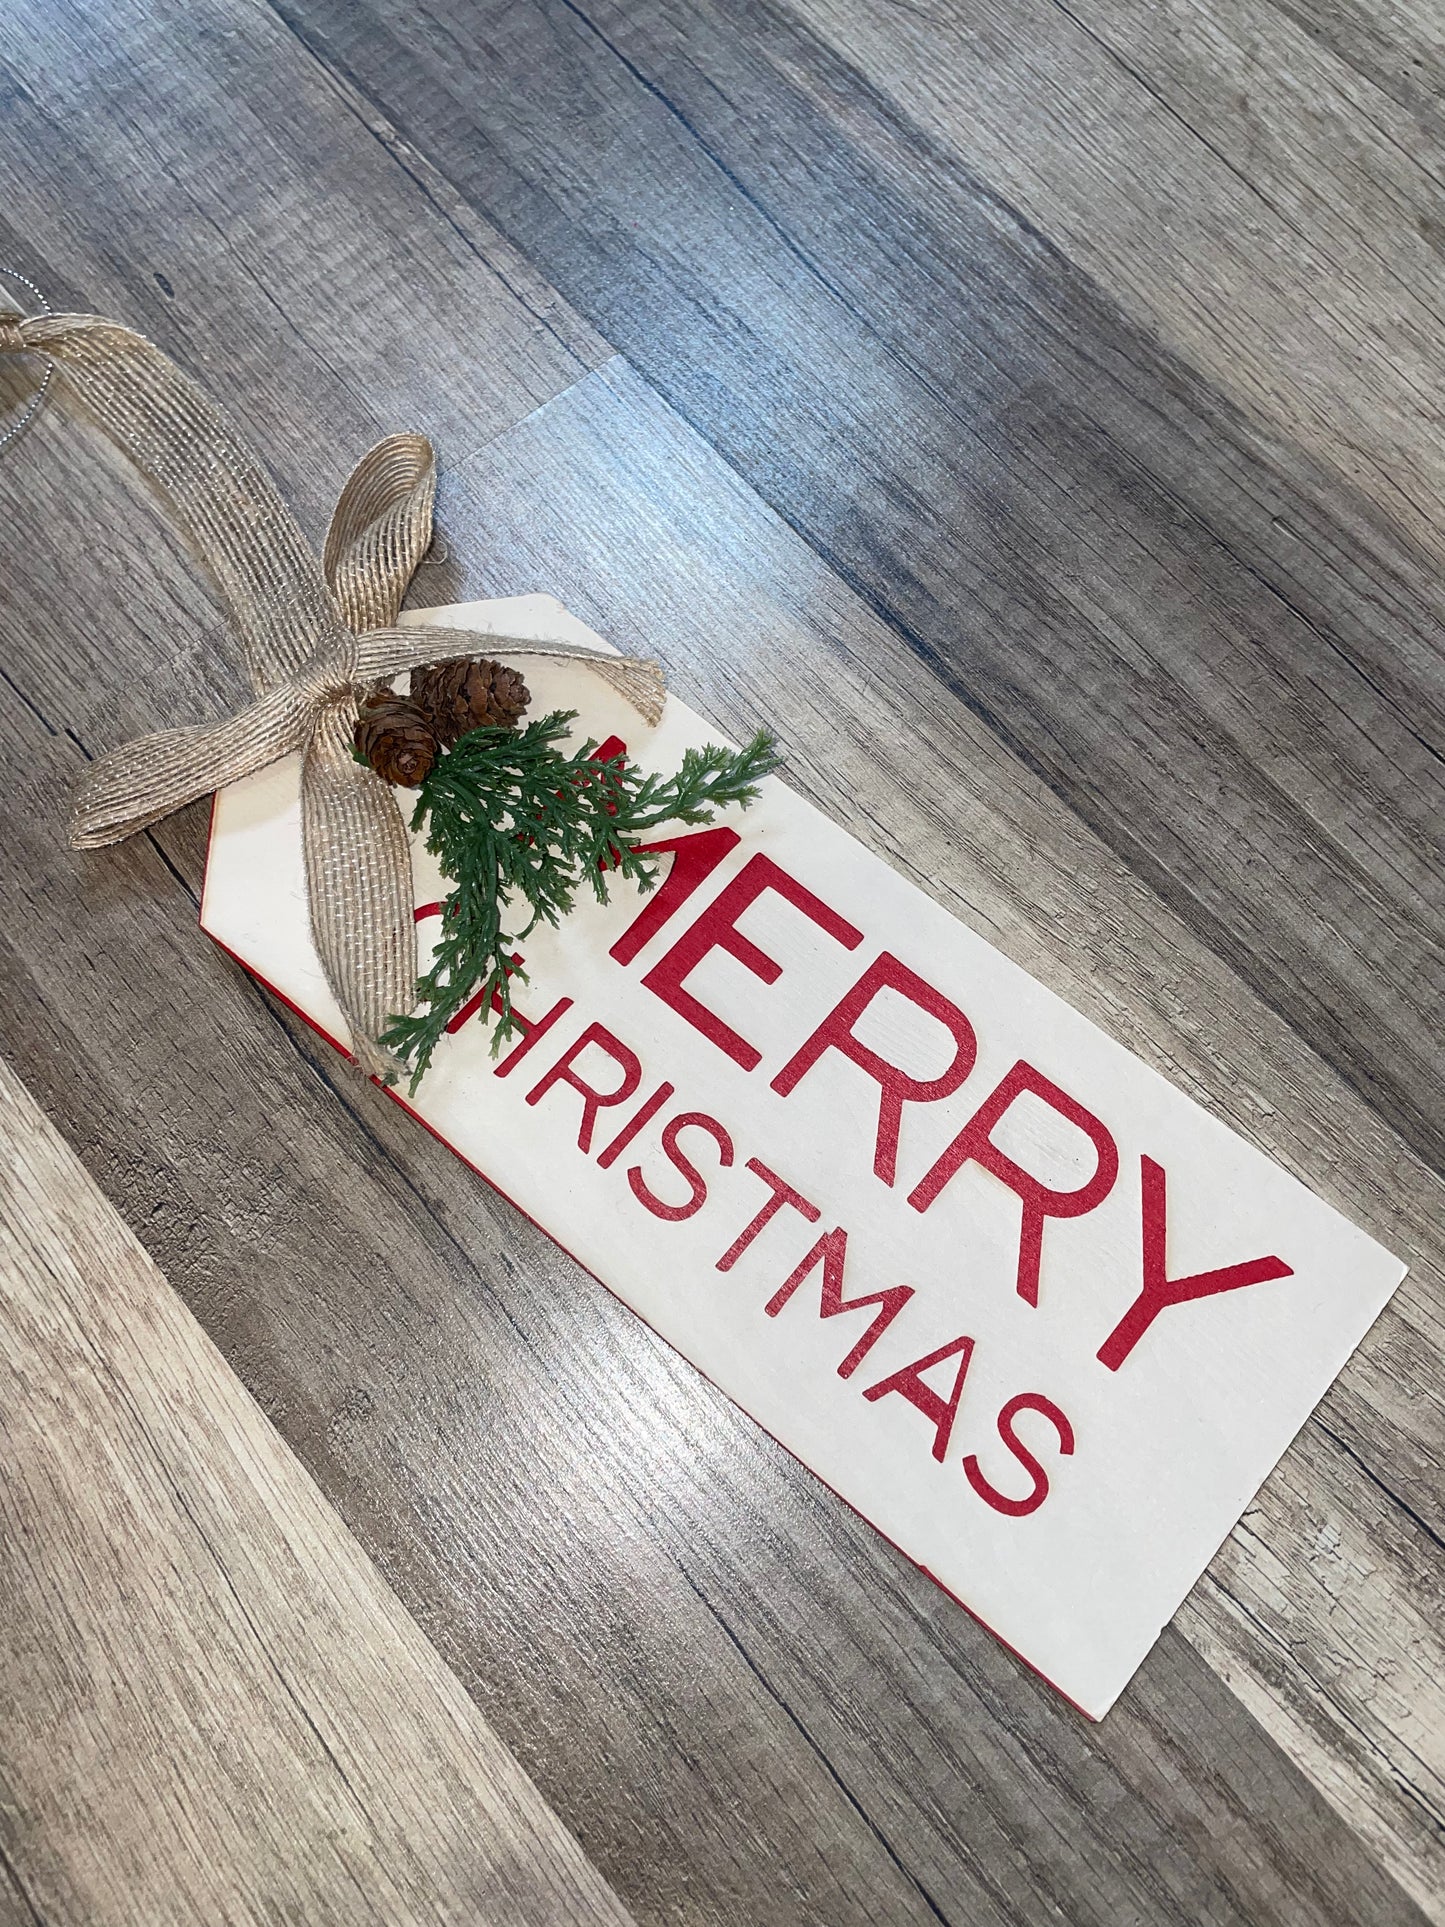 Merry Christmas Sign Ornament